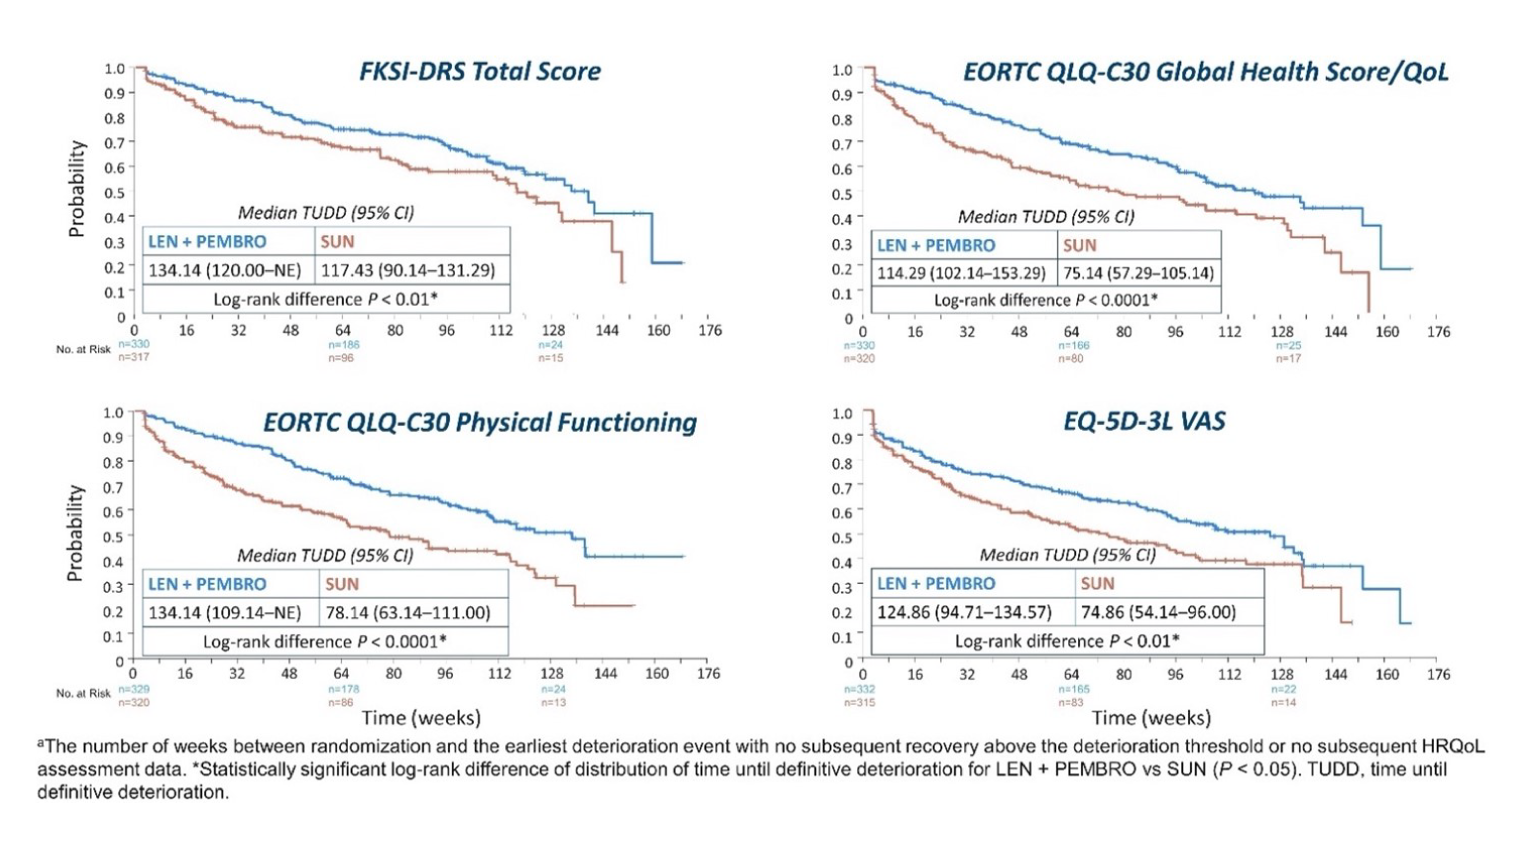 Kaplan-Meier plots of time until definitive deterioration for different questionnaires (the FKSI-DRS total score, the EORTC QLQ-C30 global health status/QoL scale, the EORTC QLQ-C30 physical function scale, and the EQ-5D-3L Visual Analogue Scale) administered to patients in the CLEAR trial receiving LEN-PEM and SUN at 0, 16, 32, 48, 64, 80, 96, 112, 128, 144, 160, and 176 weeks. The median until definitive deterioration with the corresponding 95% confidence intervals was calculated. Separation of curves is maintained over time for each questionnaire except for the EQ-5D-3L Visual Analogue Scale where the 2 curves connect and then separate at week 128.